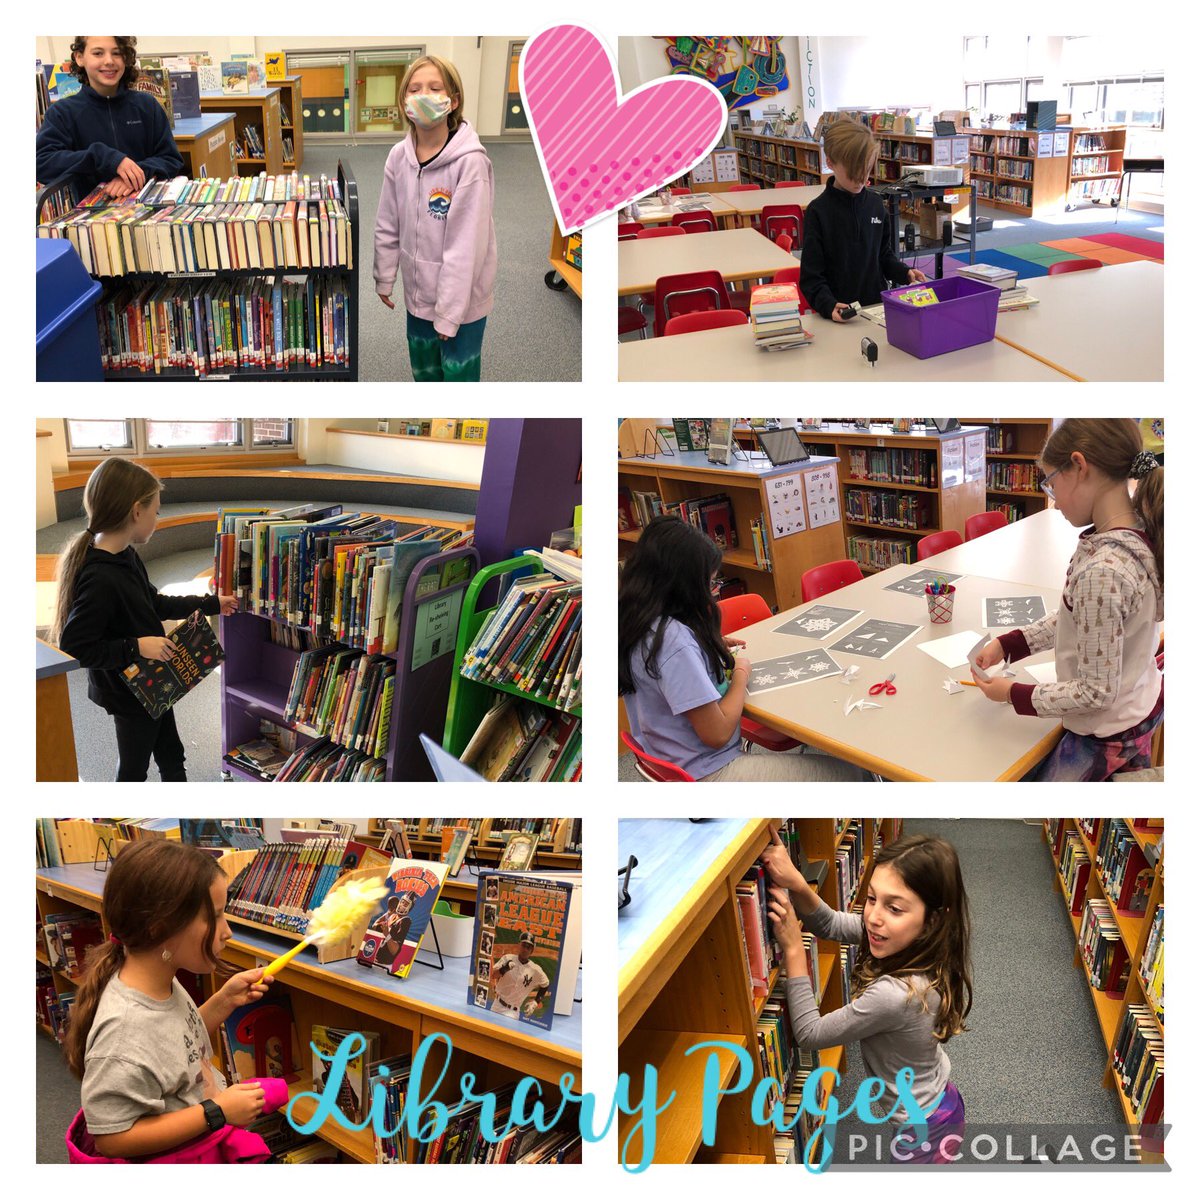 Library Pages started this week! We are thrilled to have these awesome 5th graders helping to make the library amazing. Overheard: ‘this is so much fun!’ 😊❤️ <a target='_blank' href='http://twitter.com/GlebeAPS'>@GlebeAPS</a> <a target='_blank' href='http://twitter.com/APSLibrarians'>@APSLibrarians</a> <a target='_blank' href='https://t.co/iszmHJRxee'>https://t.co/iszmHJRxee</a>